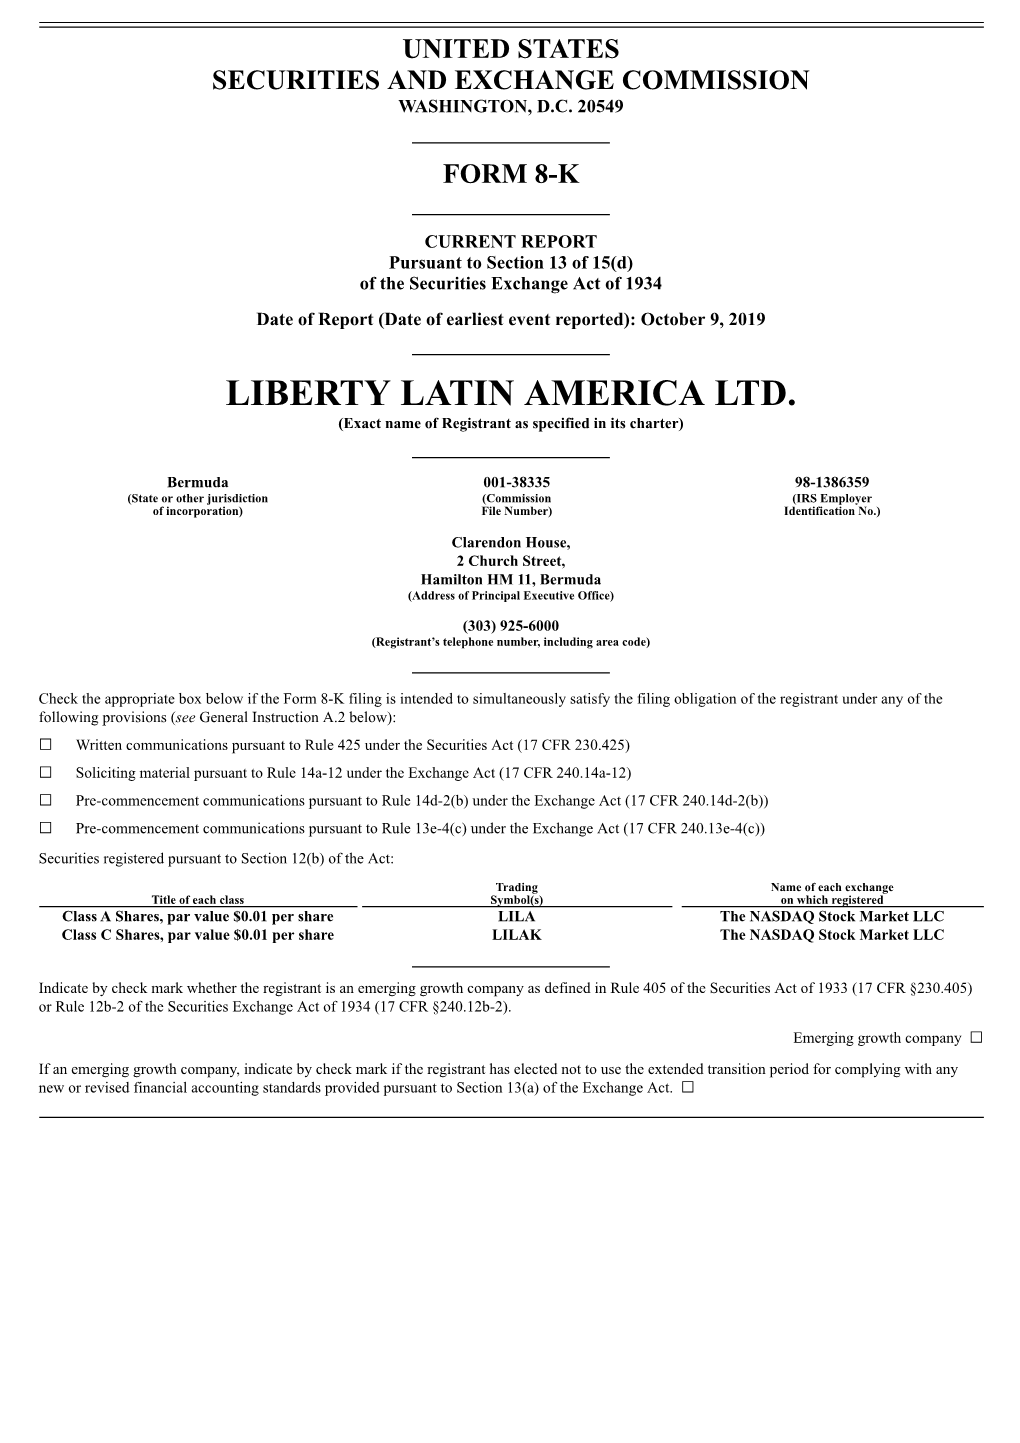 LIBERTY LATIN AMERICA LTD. (Exact Name of Registrant As Specified in Its Charter)